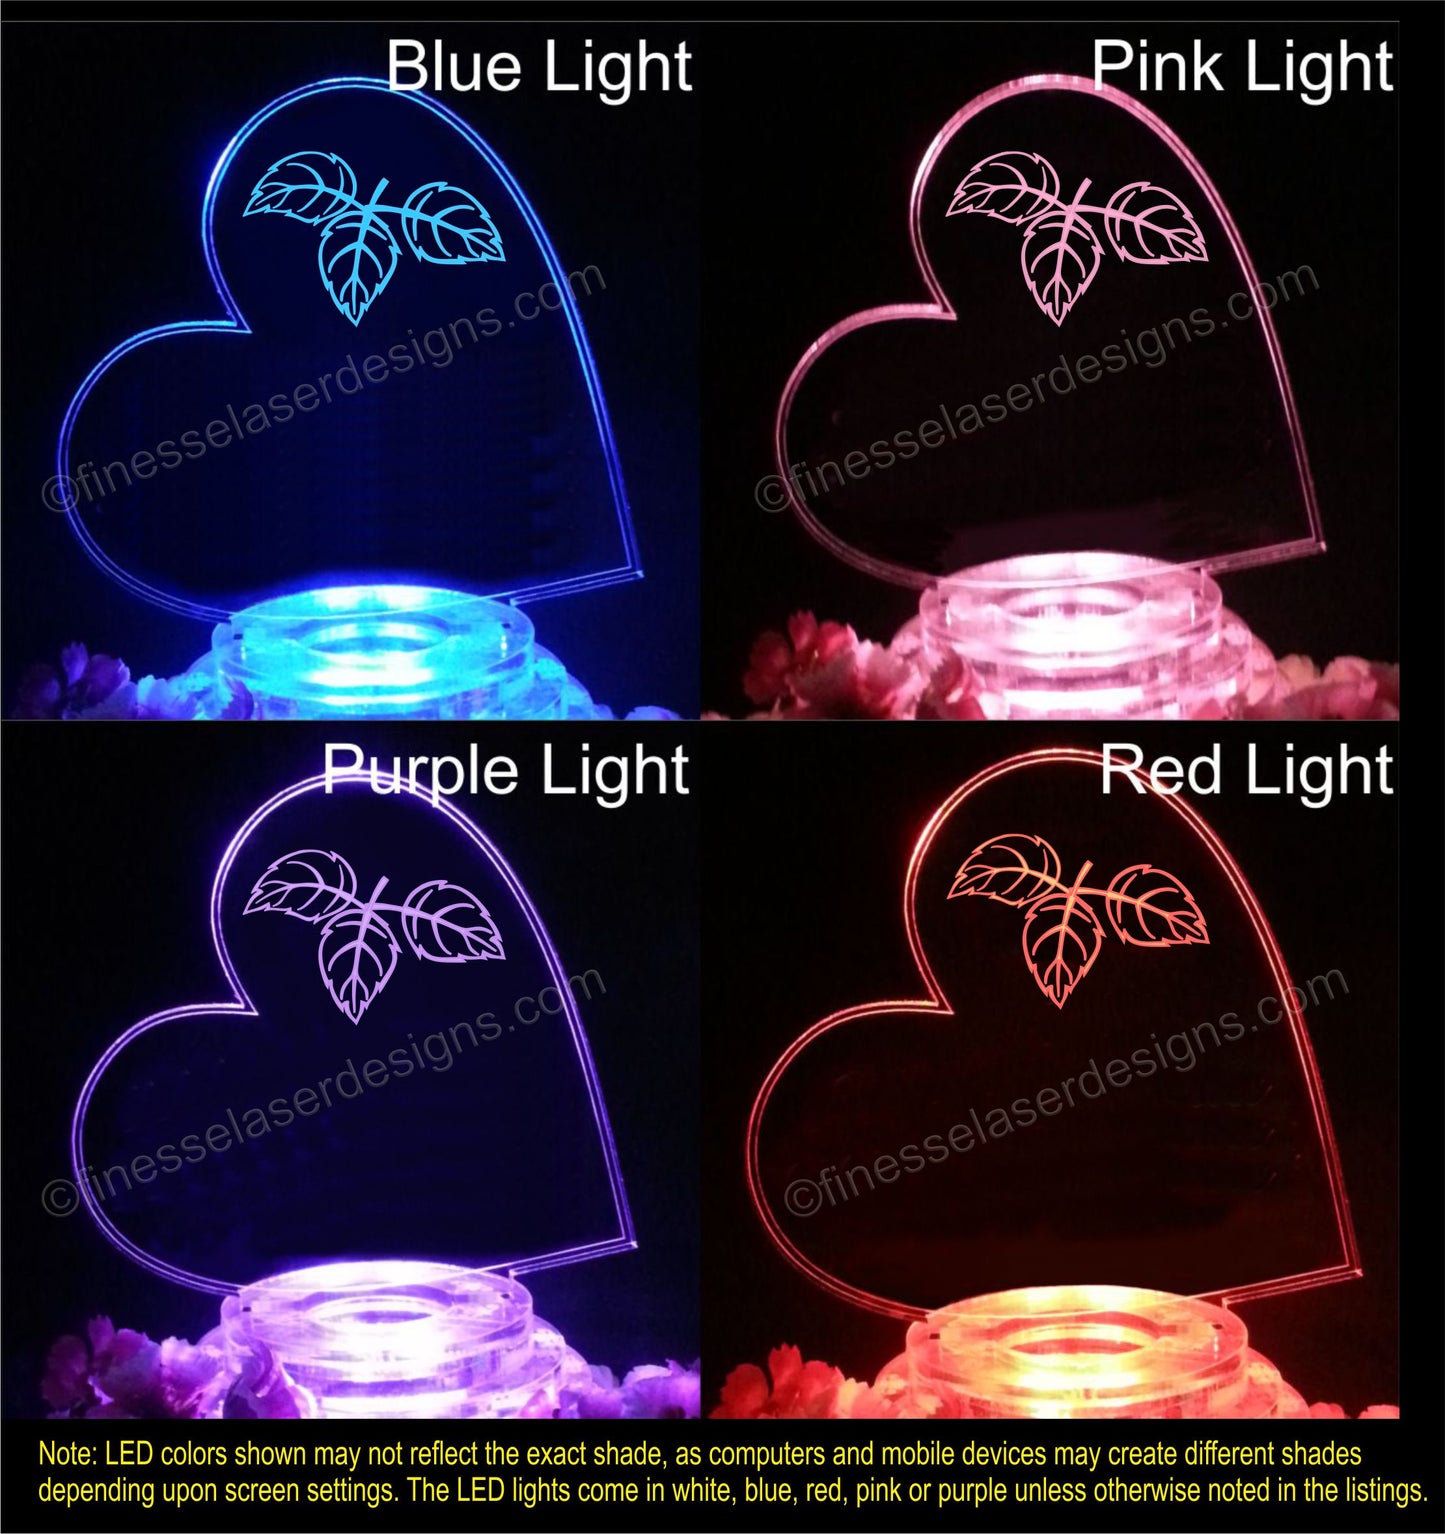 4 colored lighting views of a heart shaped cake topper designed with fall leaves, shown in blue, pink, purple and red lighting